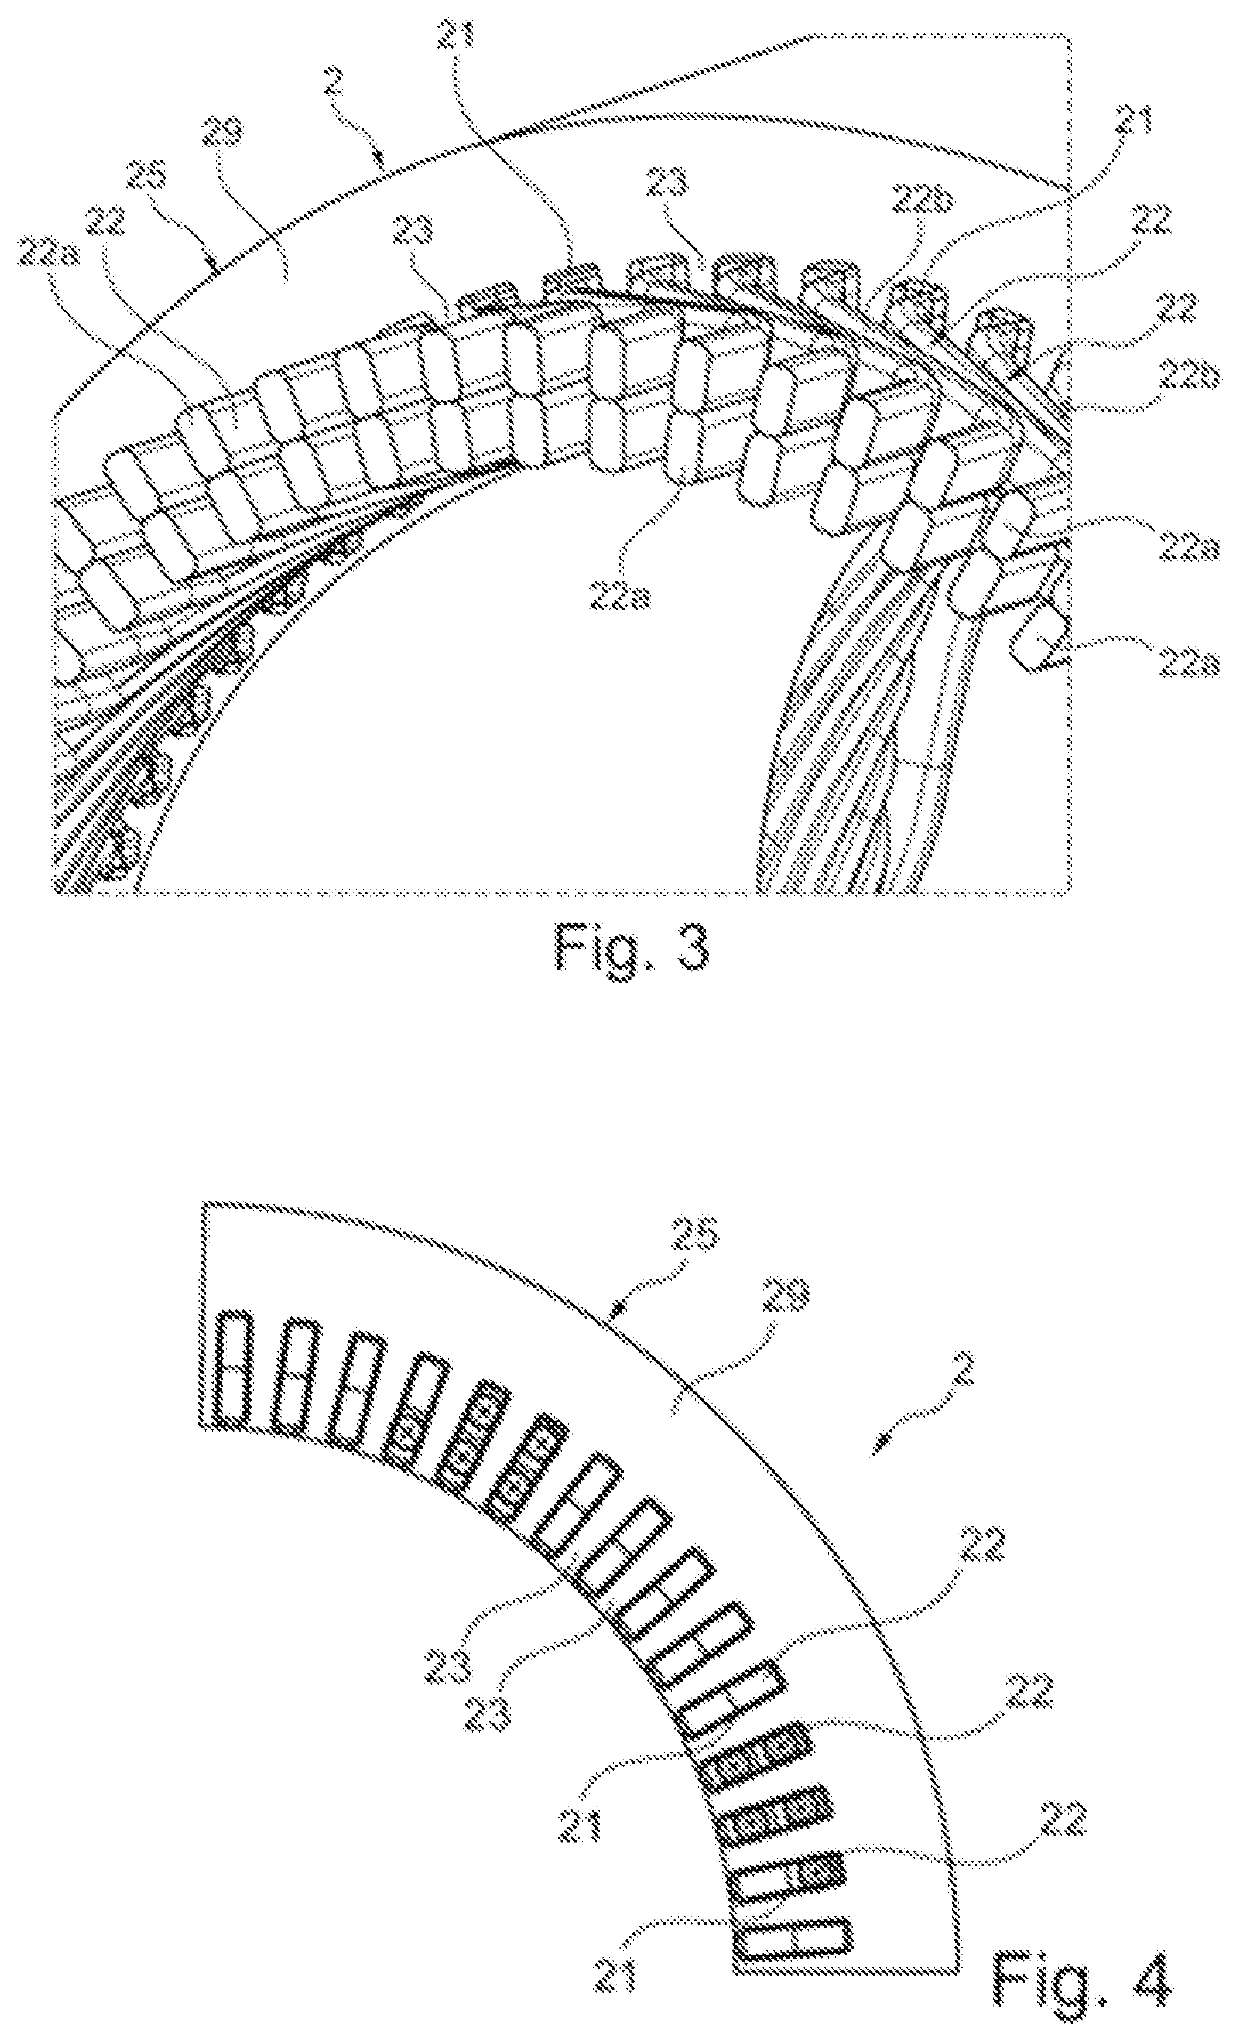 Stator for a rotating electrical machine